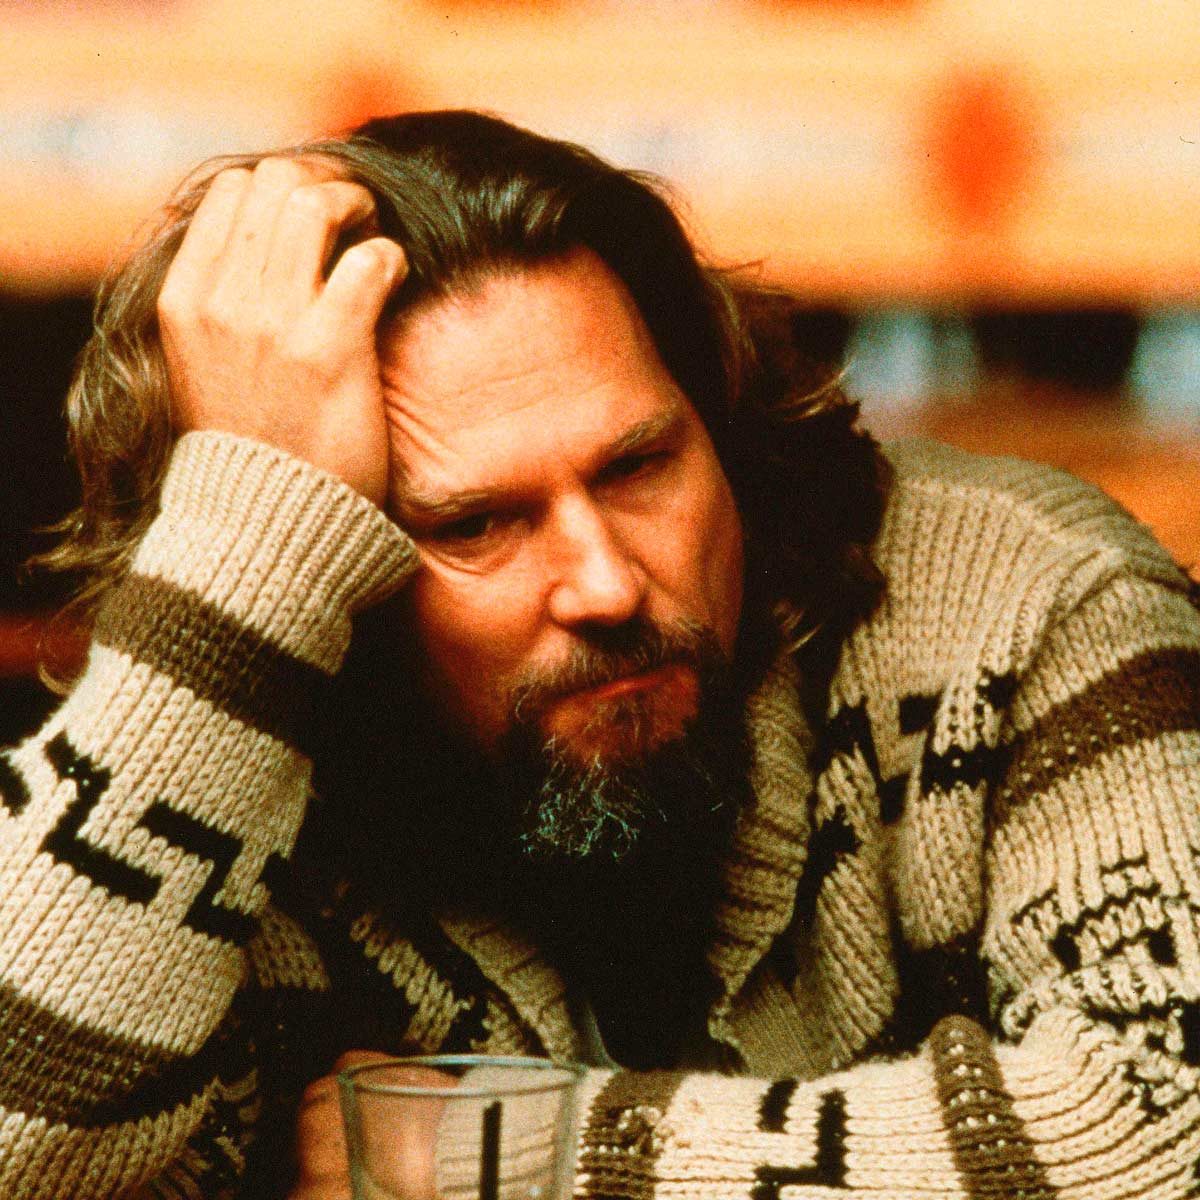 Jeff Bridges as The Dude from The Big Lebowski